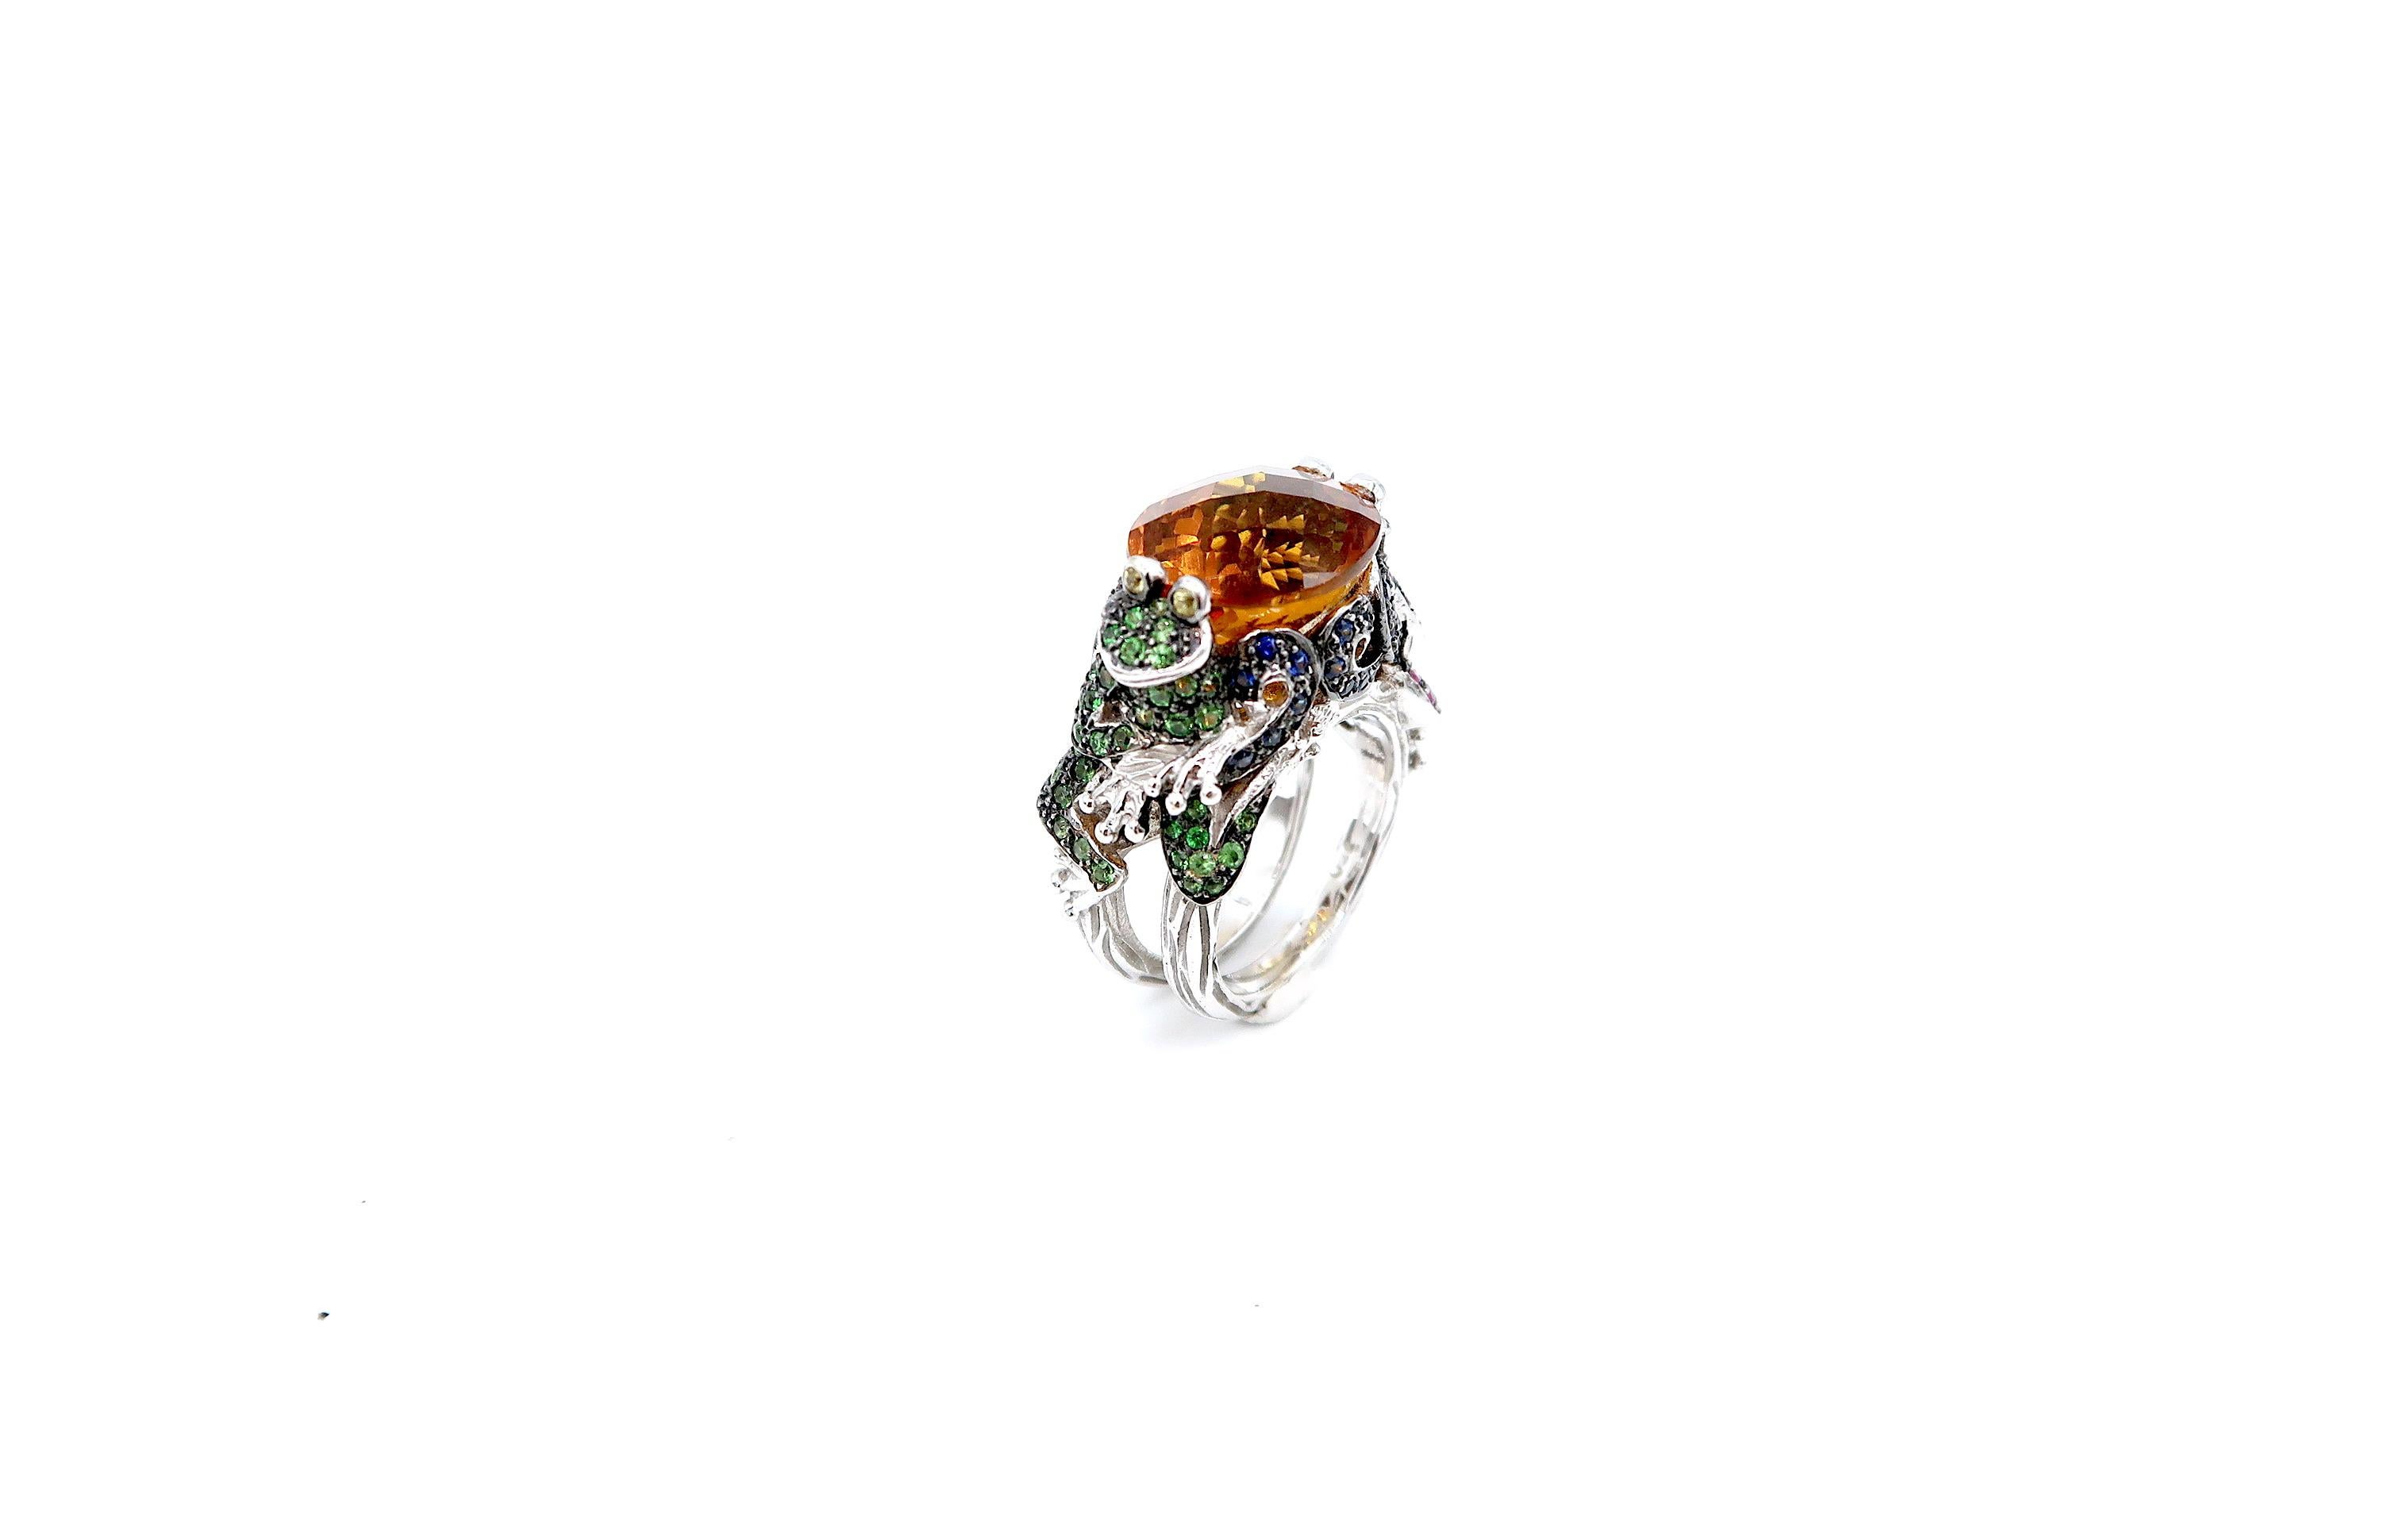 Frog Prince 9.25 Carat Citrine embellished with Blue Sapphire, Pink Sapphire, and  Tsavorite Cocktail Ring in 18 Karat White Gold 

Complimentary resizing service for this ring is available. Please kindly let us know upon check-out.

Size : 52, US